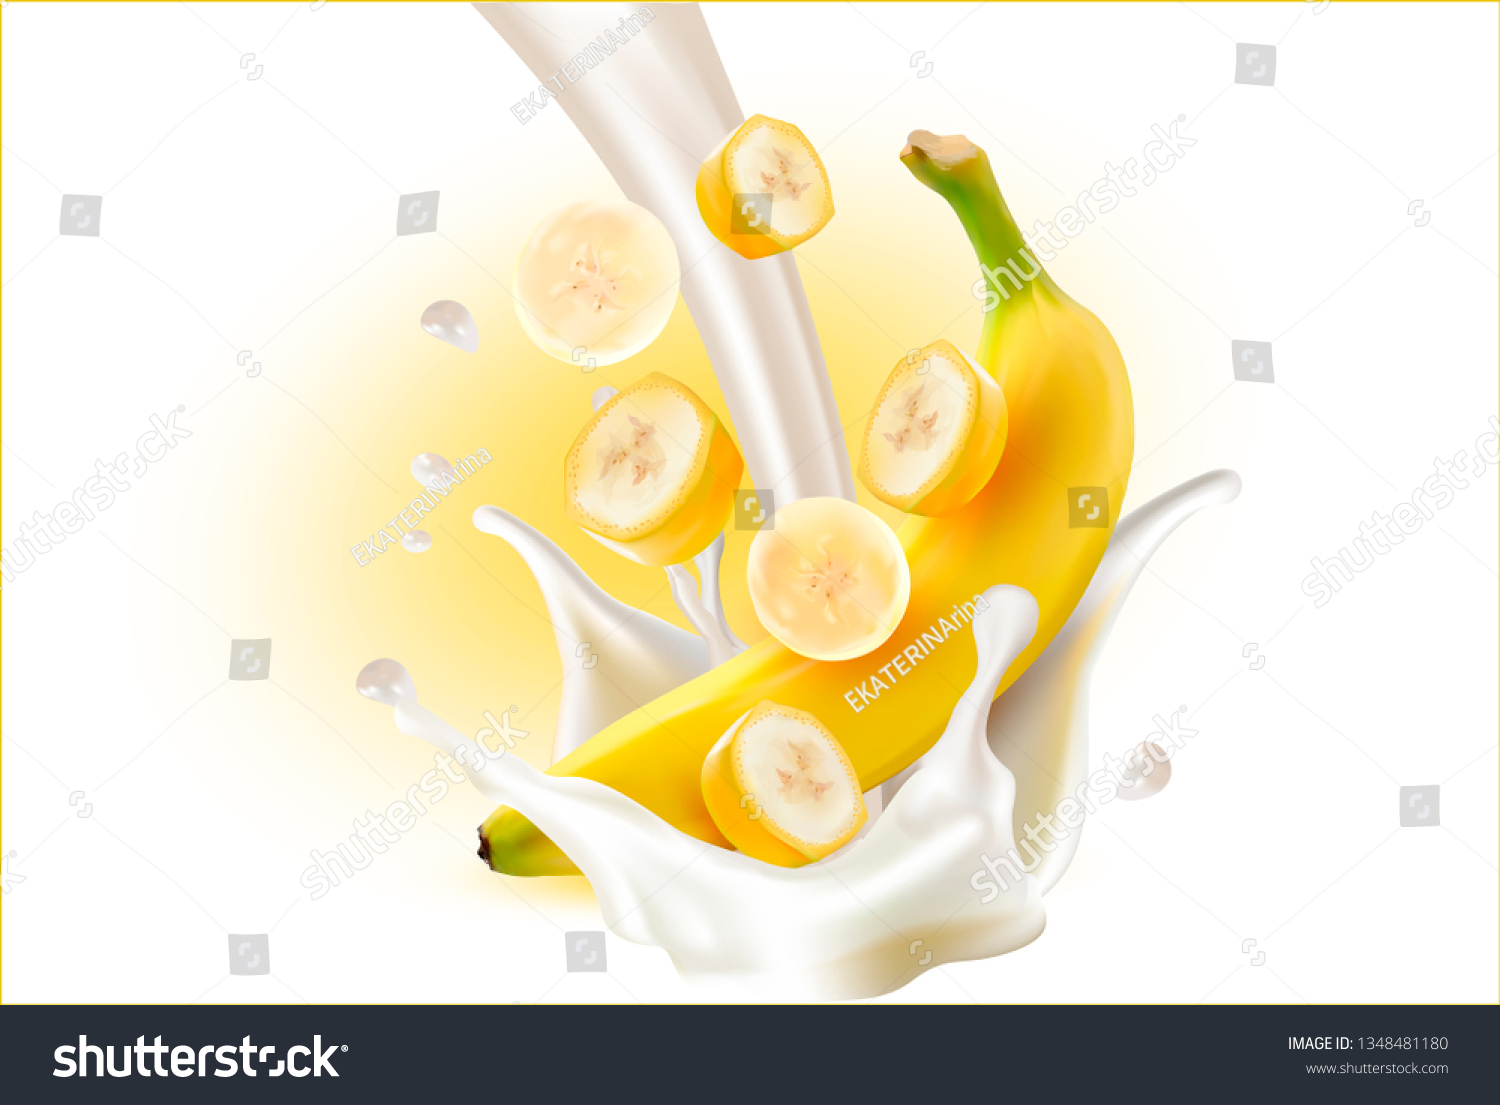 3d. Splash of Banana Milk. 3d.Vector image of a Banana.Realistic yellow Banana on the White background.Slices, pieces. #1348481180